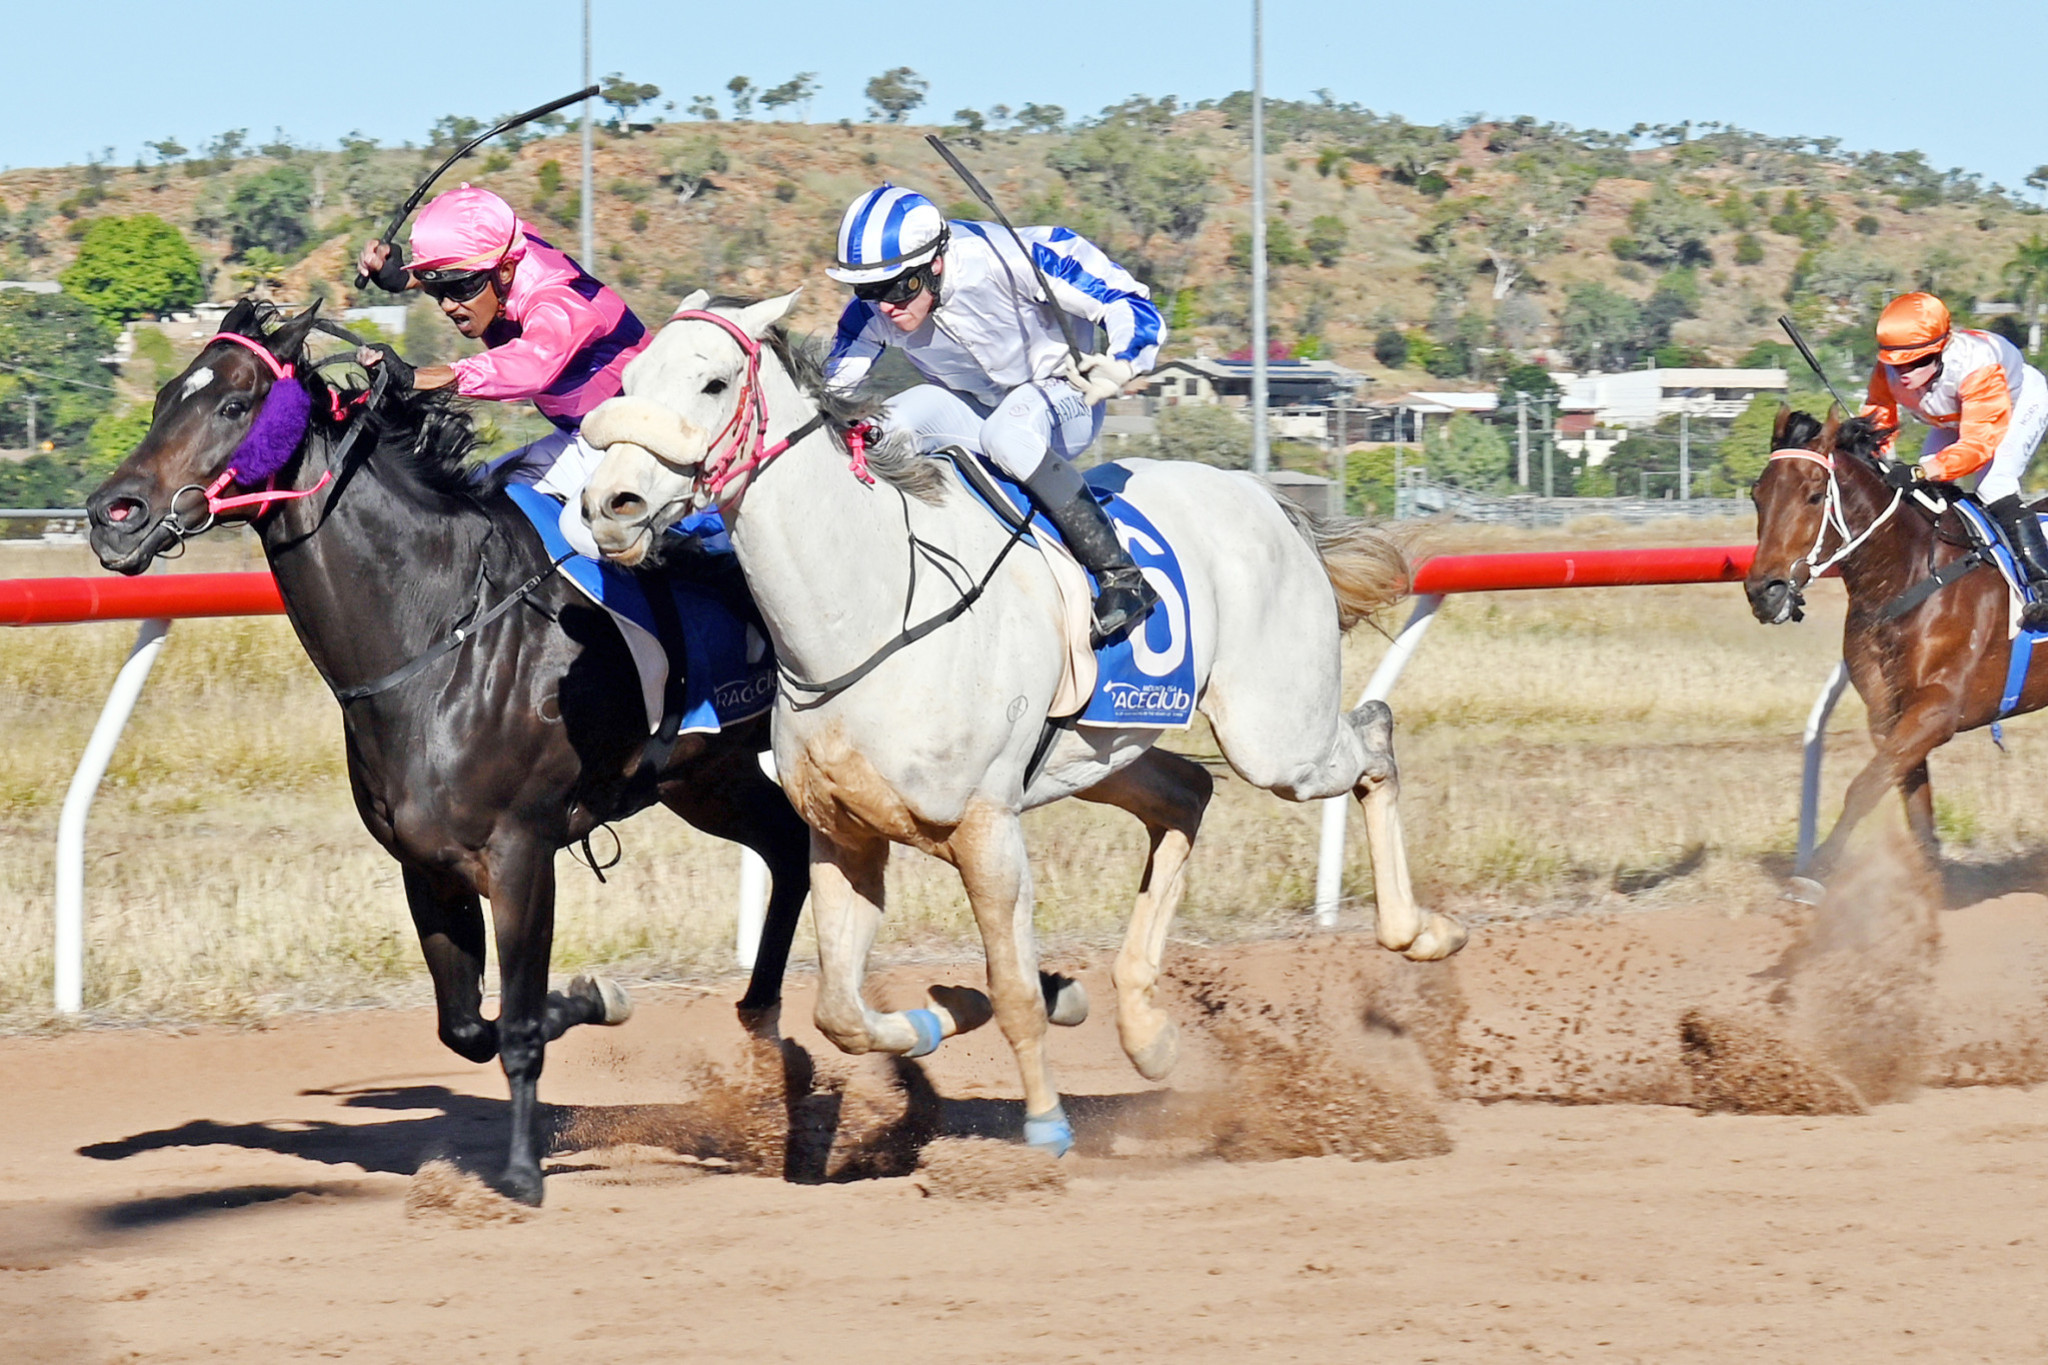 Terrence Hill on Dollson (inside) fends off Corey Bayliss on Caffrey in the Mount Isa Cup. Boxing on for third place was apprentice Chloe Lowe on Le Force.